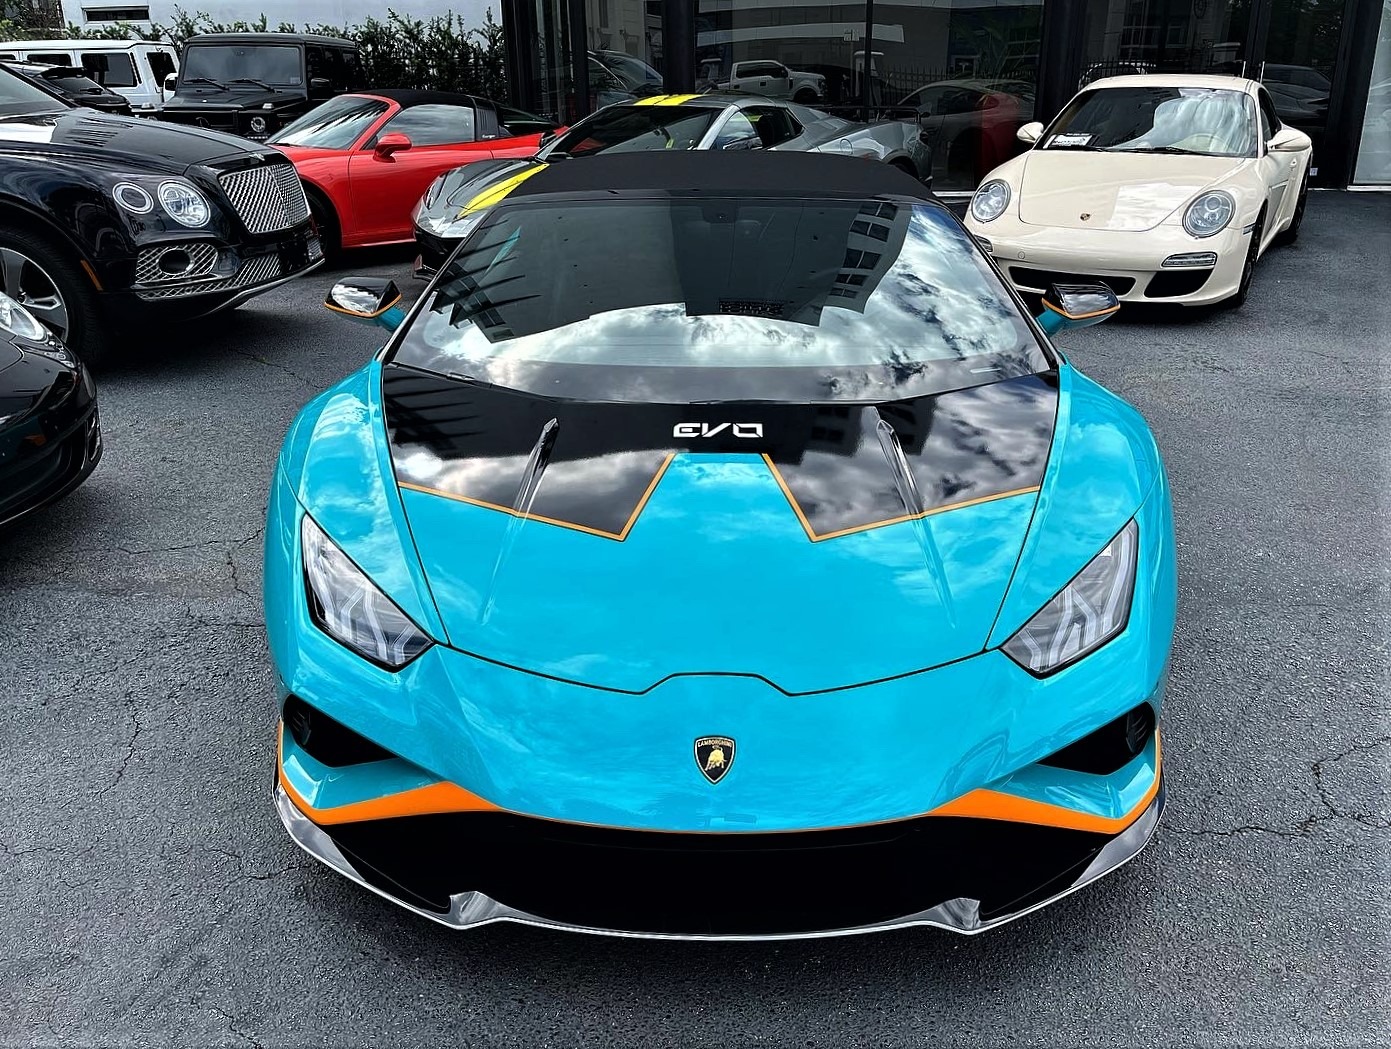 Used 2021 Lamborghini Huracan LP 610-4 EVO Spyder for sale Sold at The Gables Sports Cars in Miami FL 33146 2